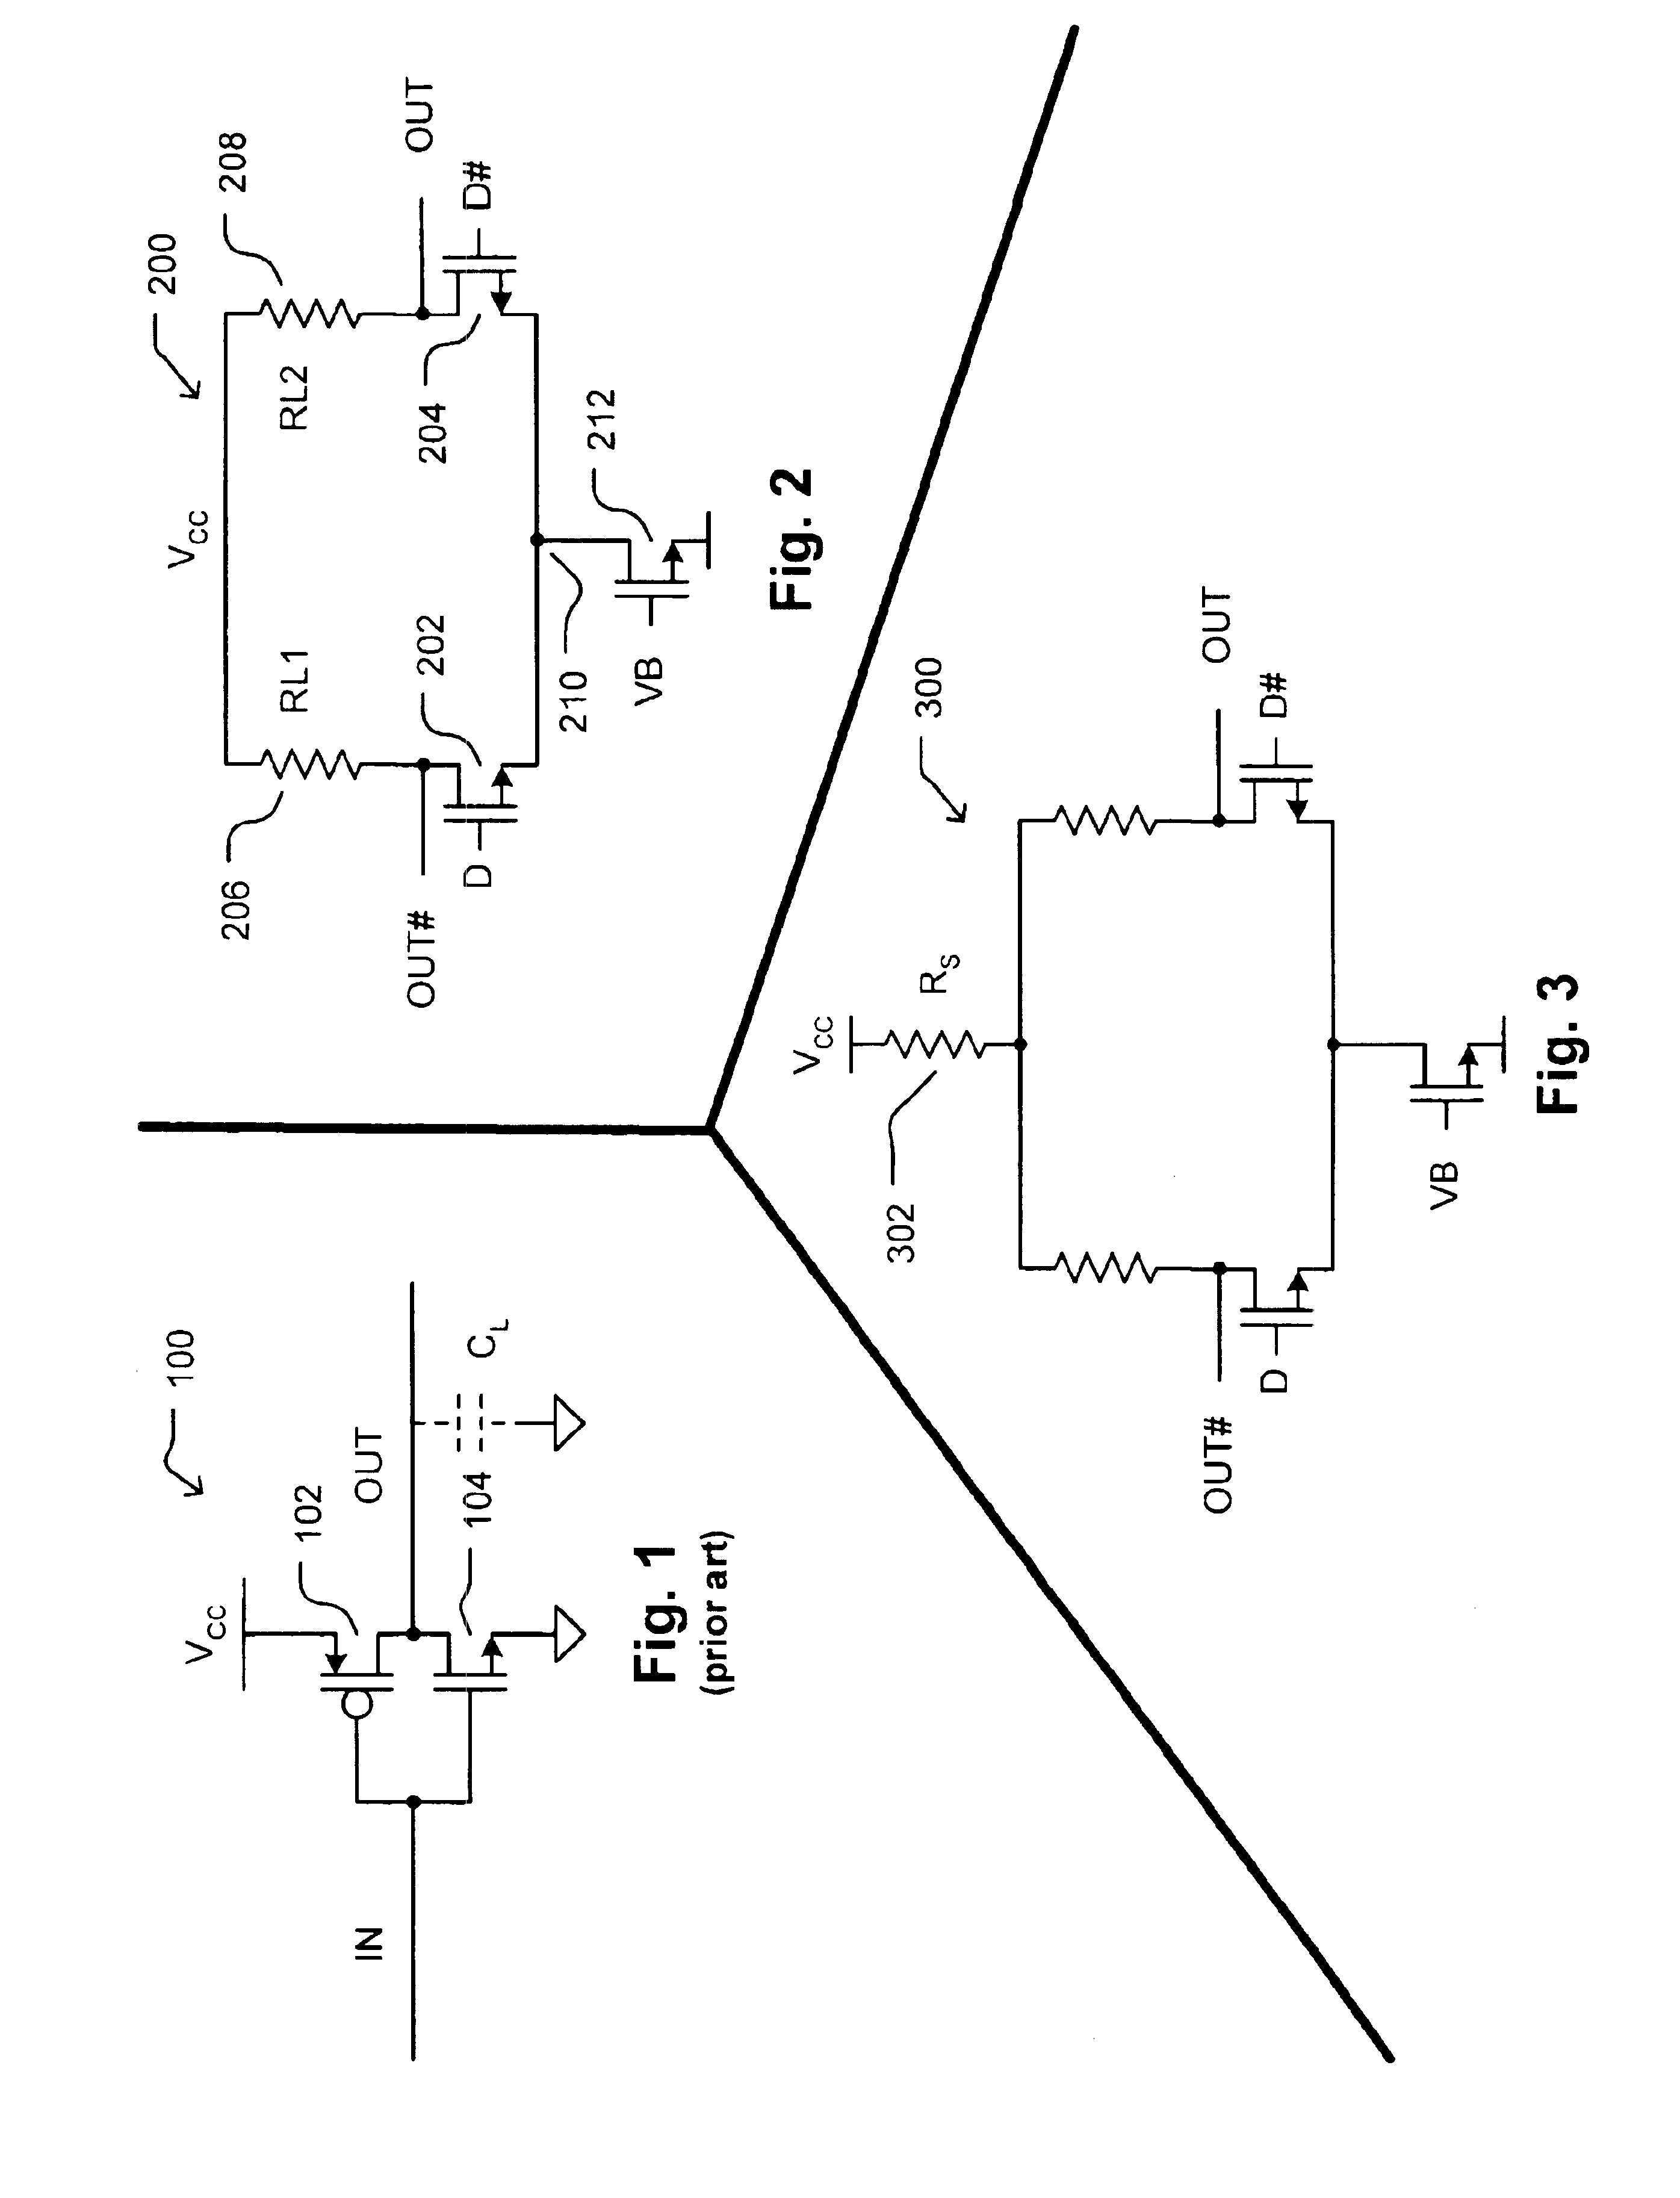 Current-controlled CMOS circuit using higher voltage supply in low voltage CMOS process